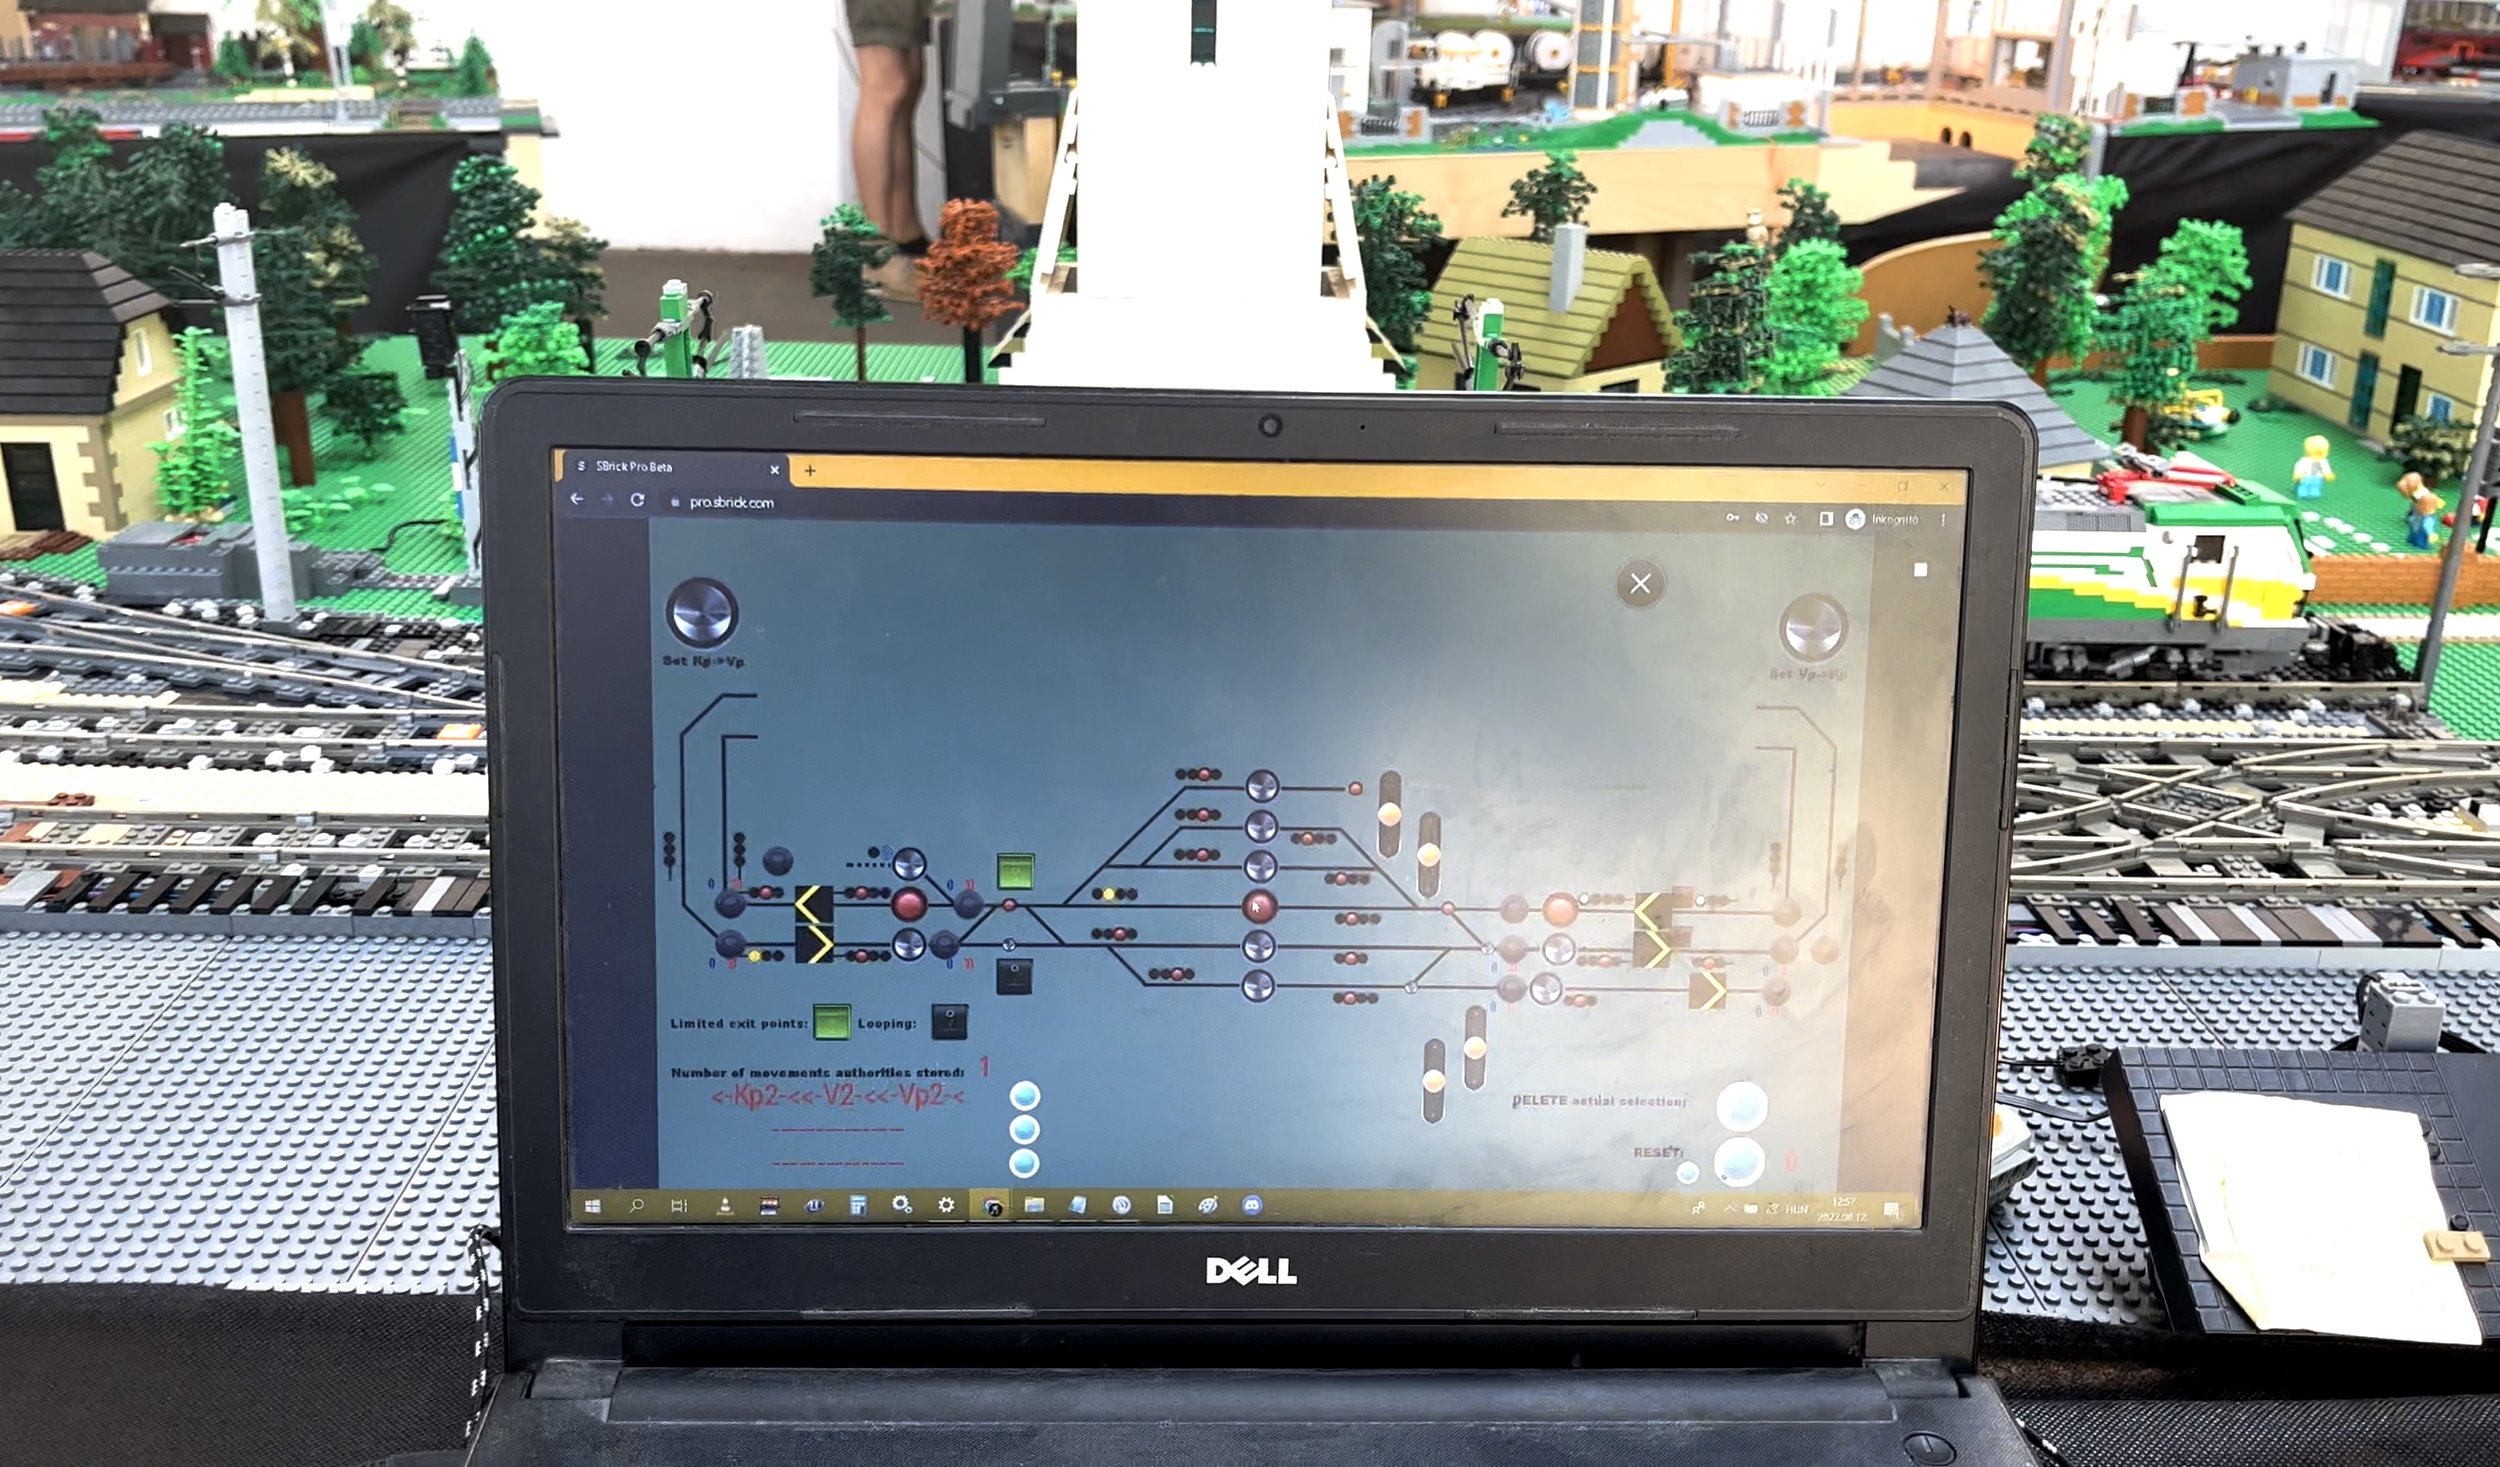 Donat Raab (from Hungary) implemented an amazing layout control system using his laptop. The virtual control panel allows operators to set routes and monitor status..